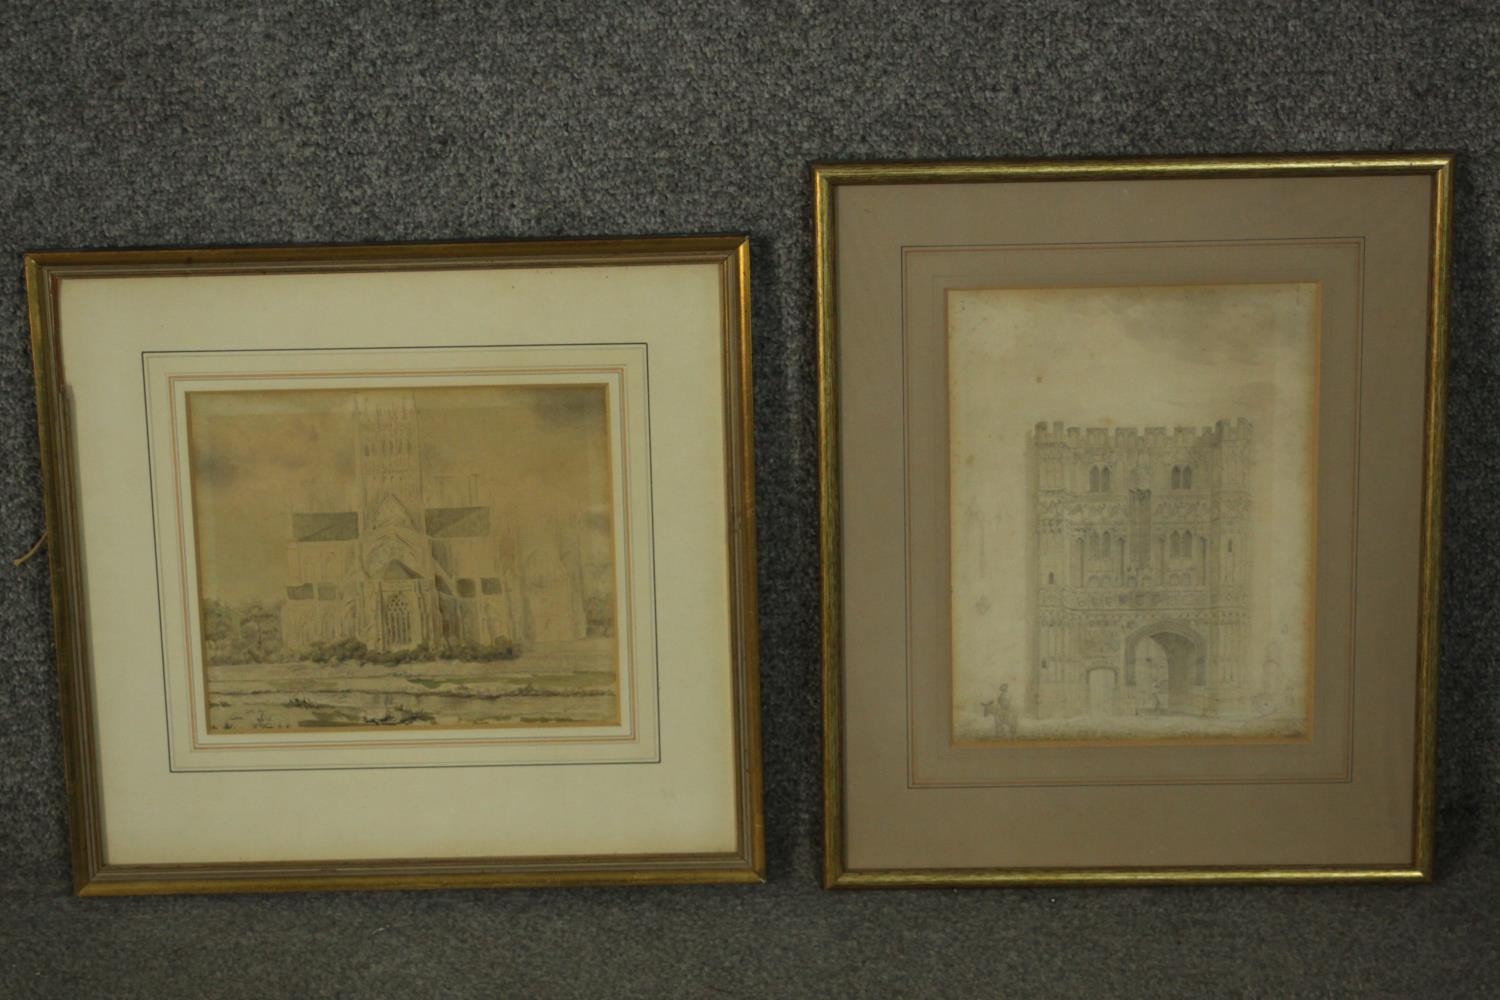 A framed and glazed watercolour of a church along with a pencil drawing of a similar subject. Both